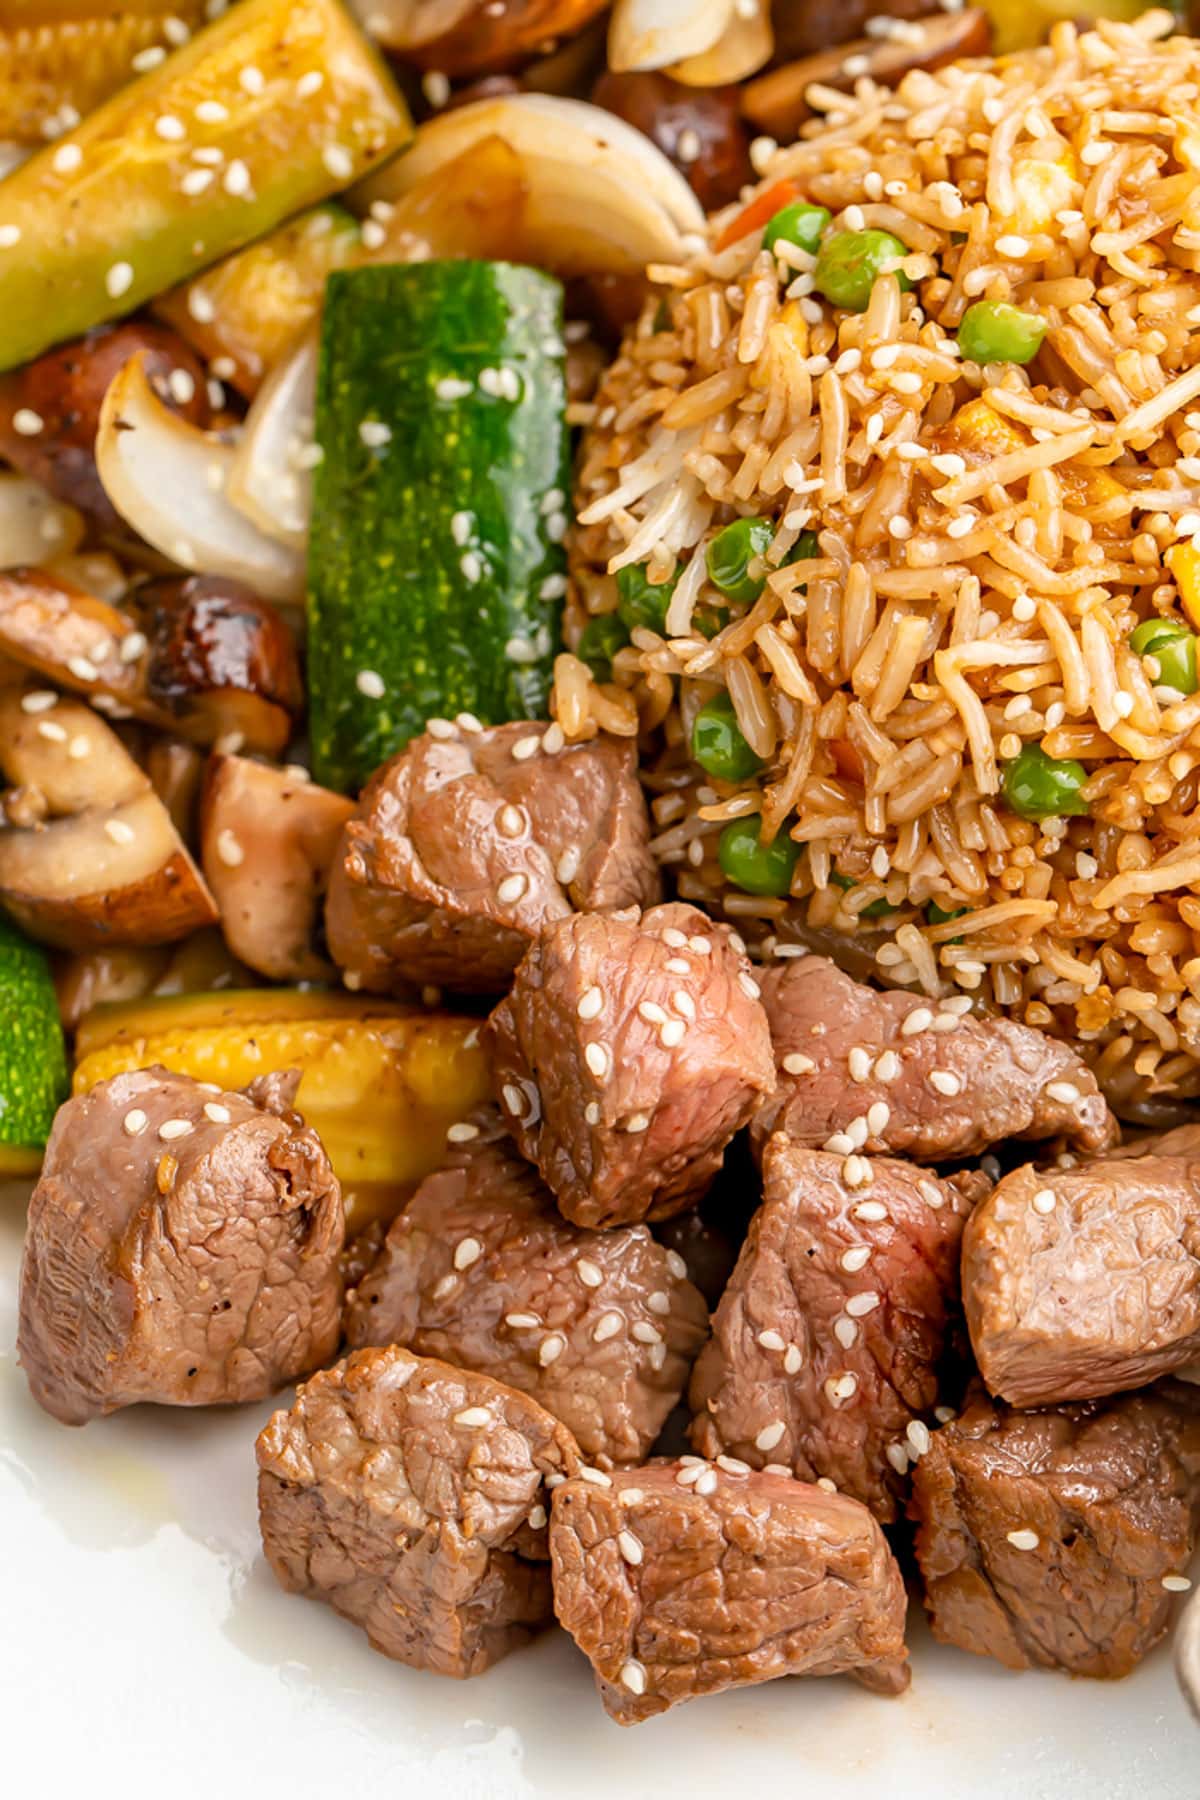 A close-up of hibachi steak garnished with sesame seeds on a plate with fried rice and stir-fry veggies.